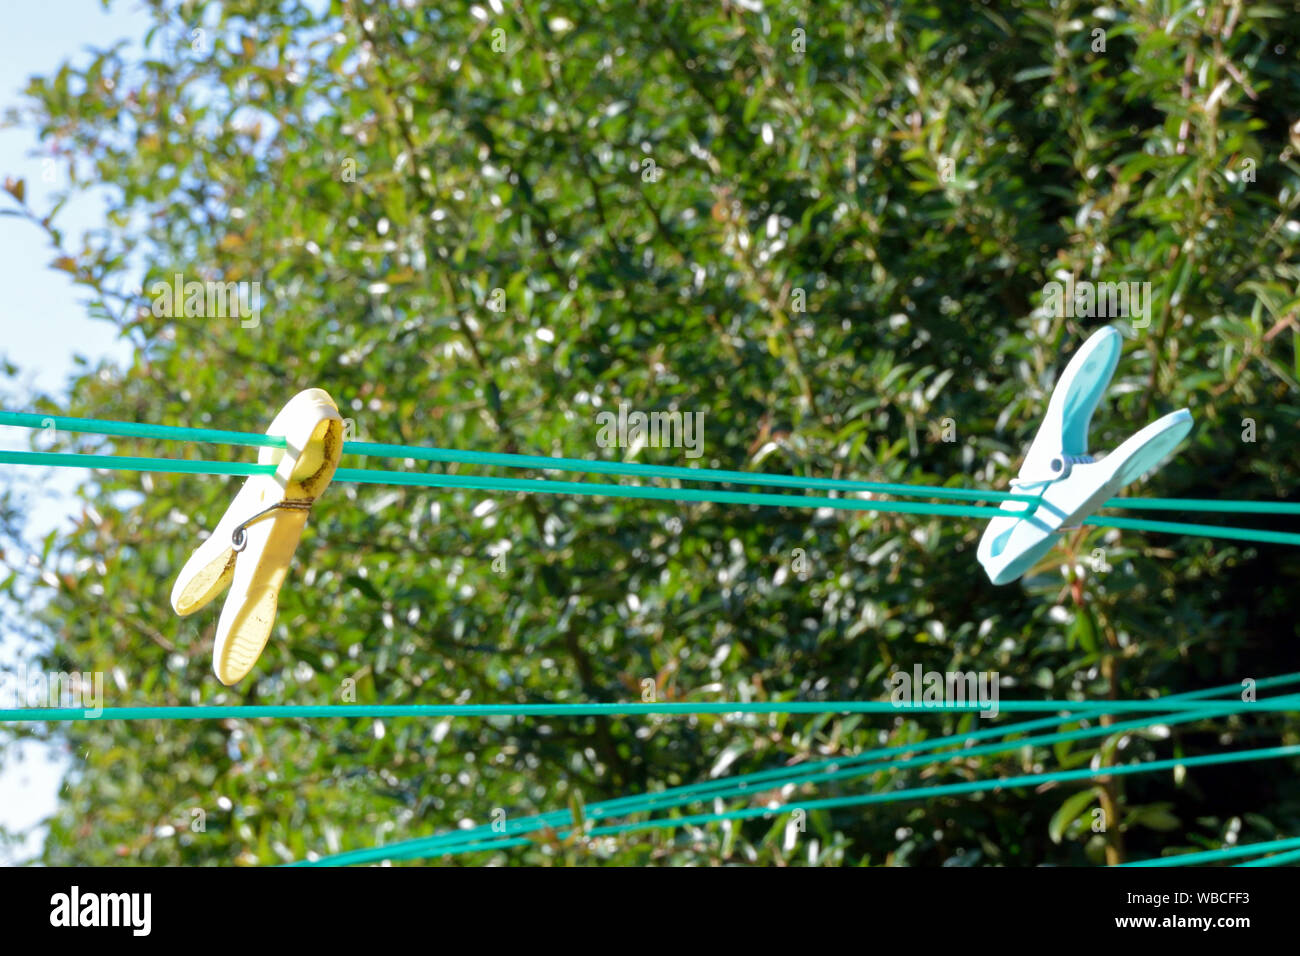 Plastic pegs on a washing line in a UK garden Stock Photo